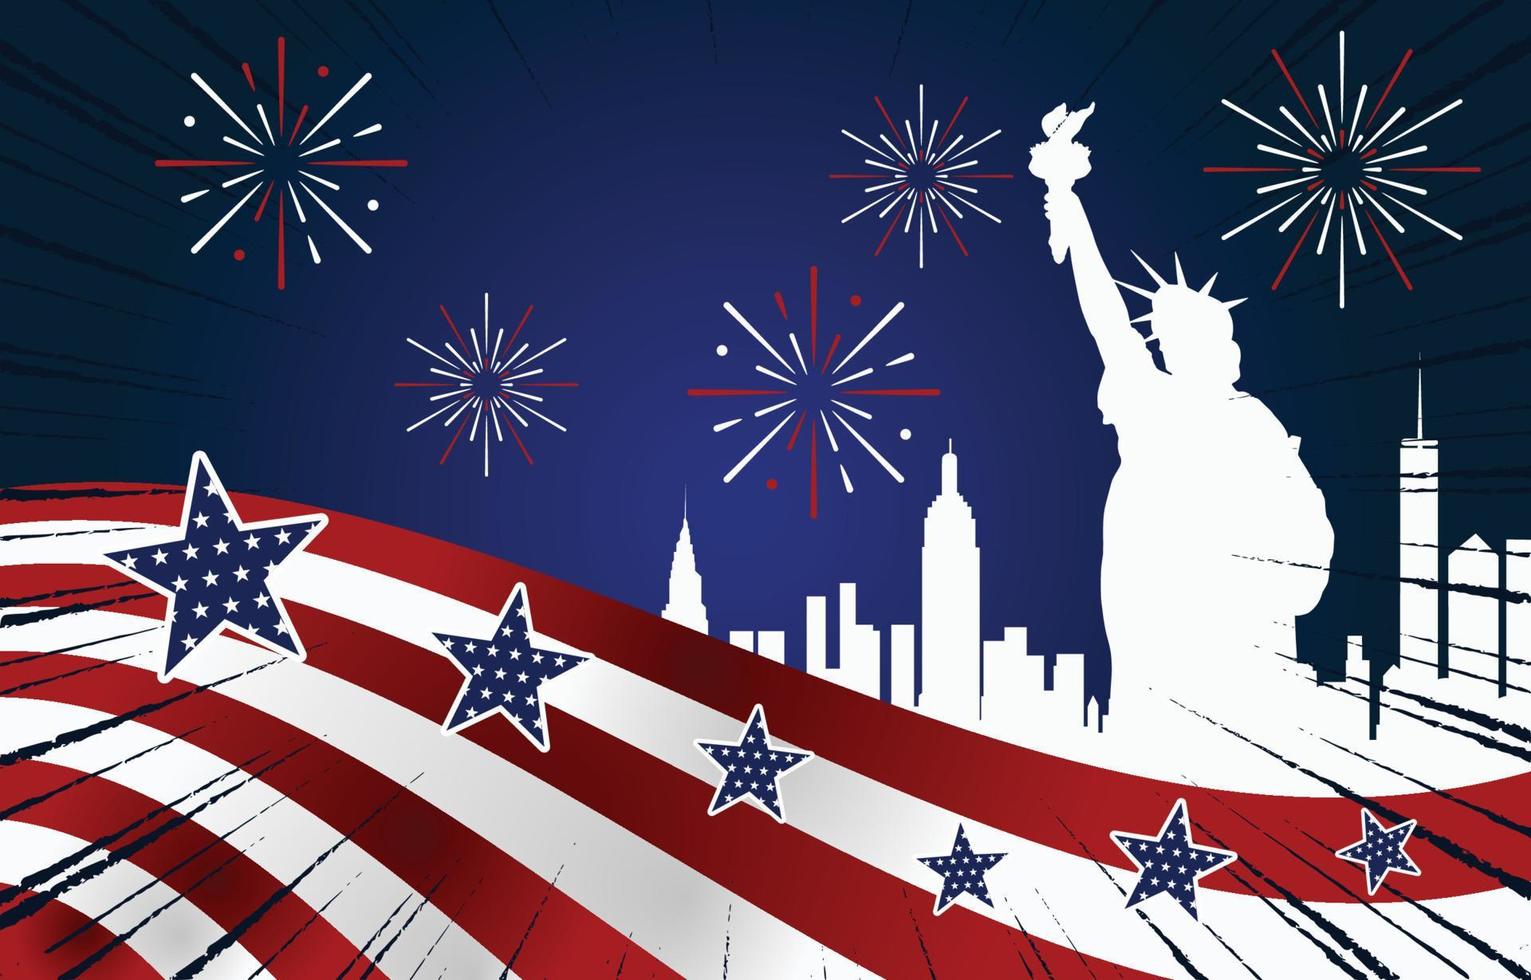 Background of America Independence Day vector